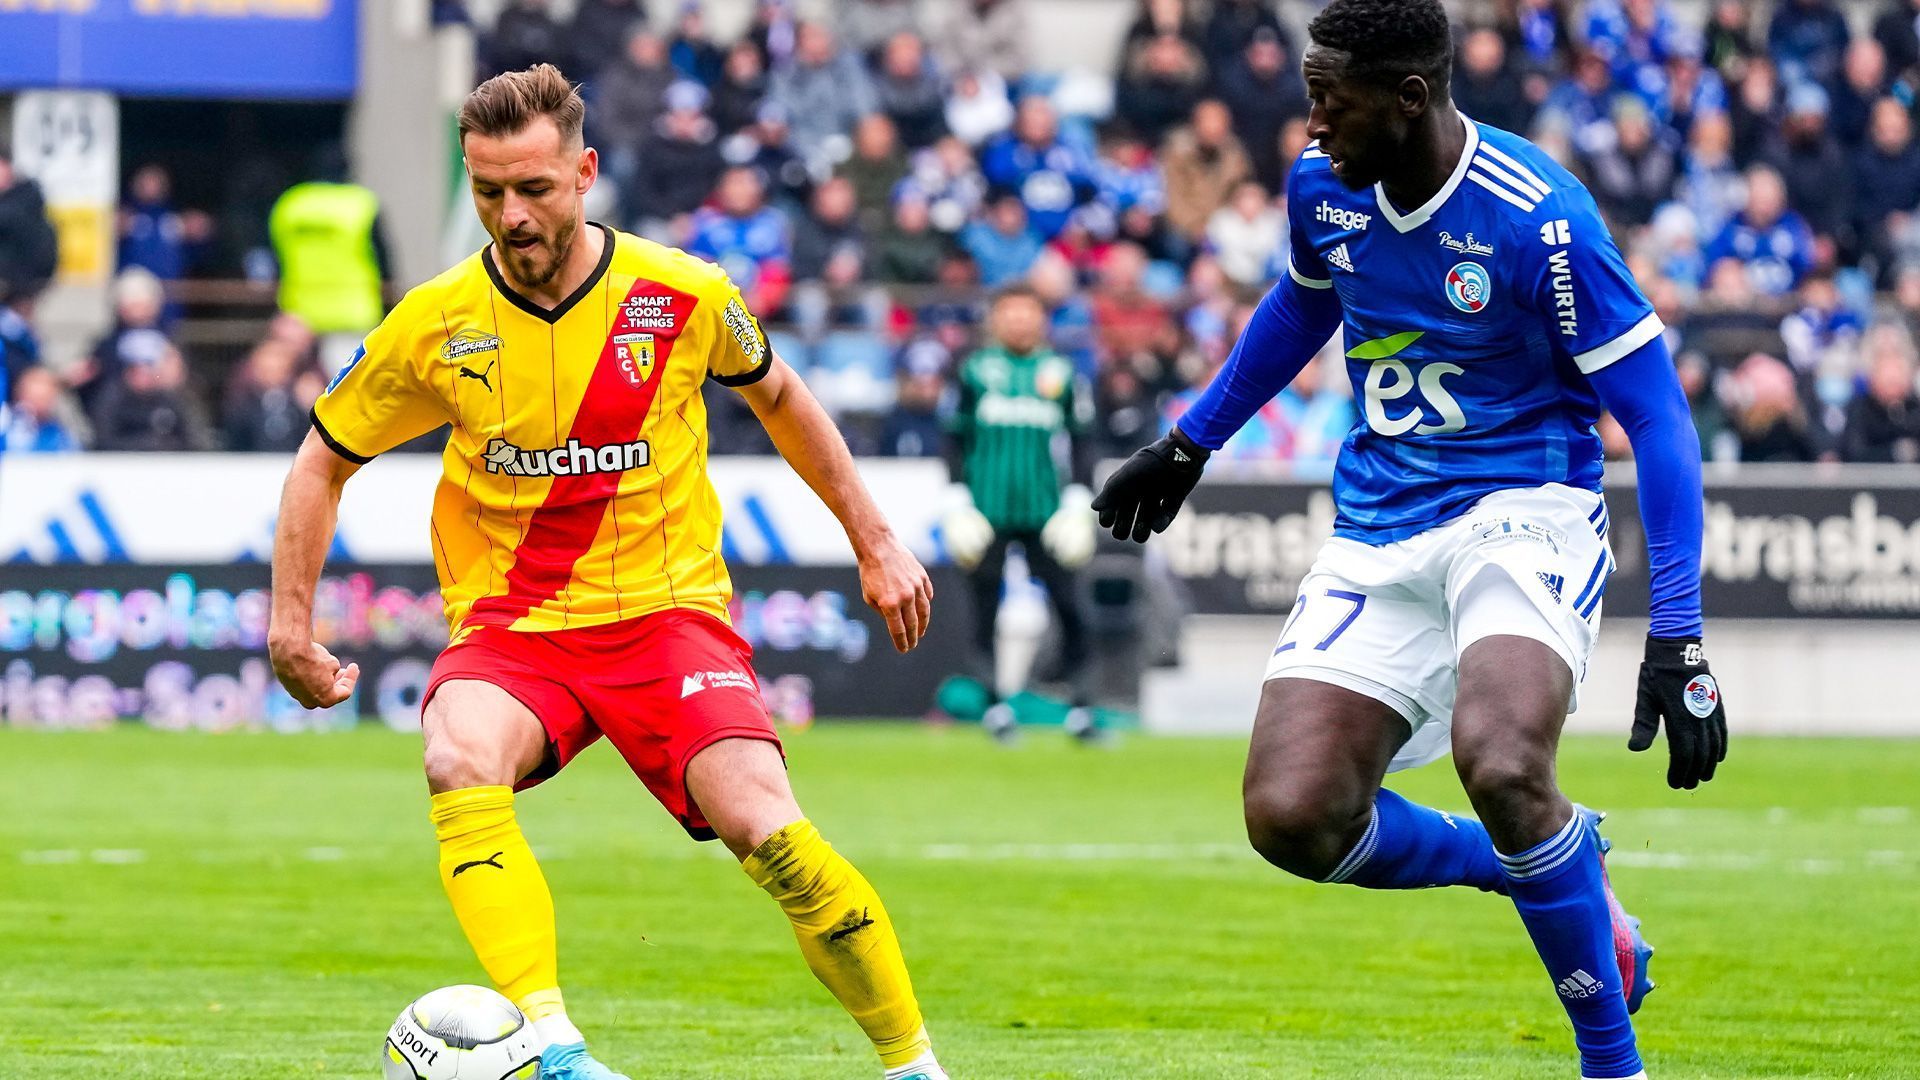 Lens will meet Strasbourg in Ligue 1 on Friday